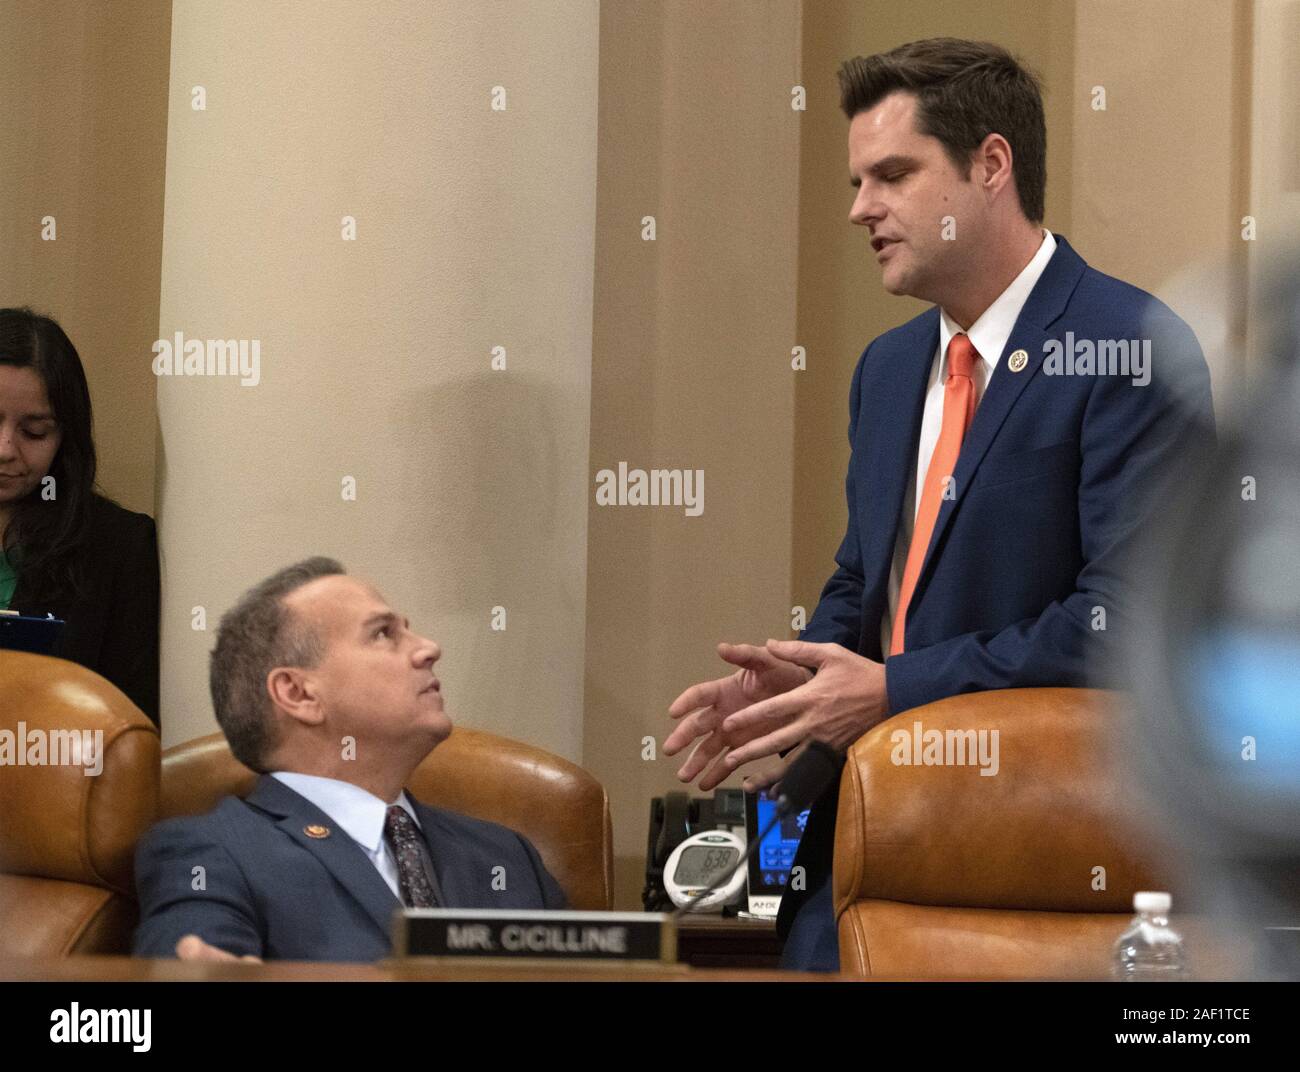 Washington, District of Columbia, USA. 11th Dec, 2019. United States Representative David Cicilline (Democrat of Rhode Island), left, and US Representative Matt Gaetz (Republican of Florida), right, confer prior to hearing opening statements as the US House Committee on the Judiciary begins its markup of House Resolution 755, Articles of Impeachment Against President Donald J. Trump, in the Longworth House Office Building in Washington, DC on Wednesday, December 11, 2019 Credit: Ron Sachs/CNP/ZUMA Wire/Alamy Live News Stock Photo